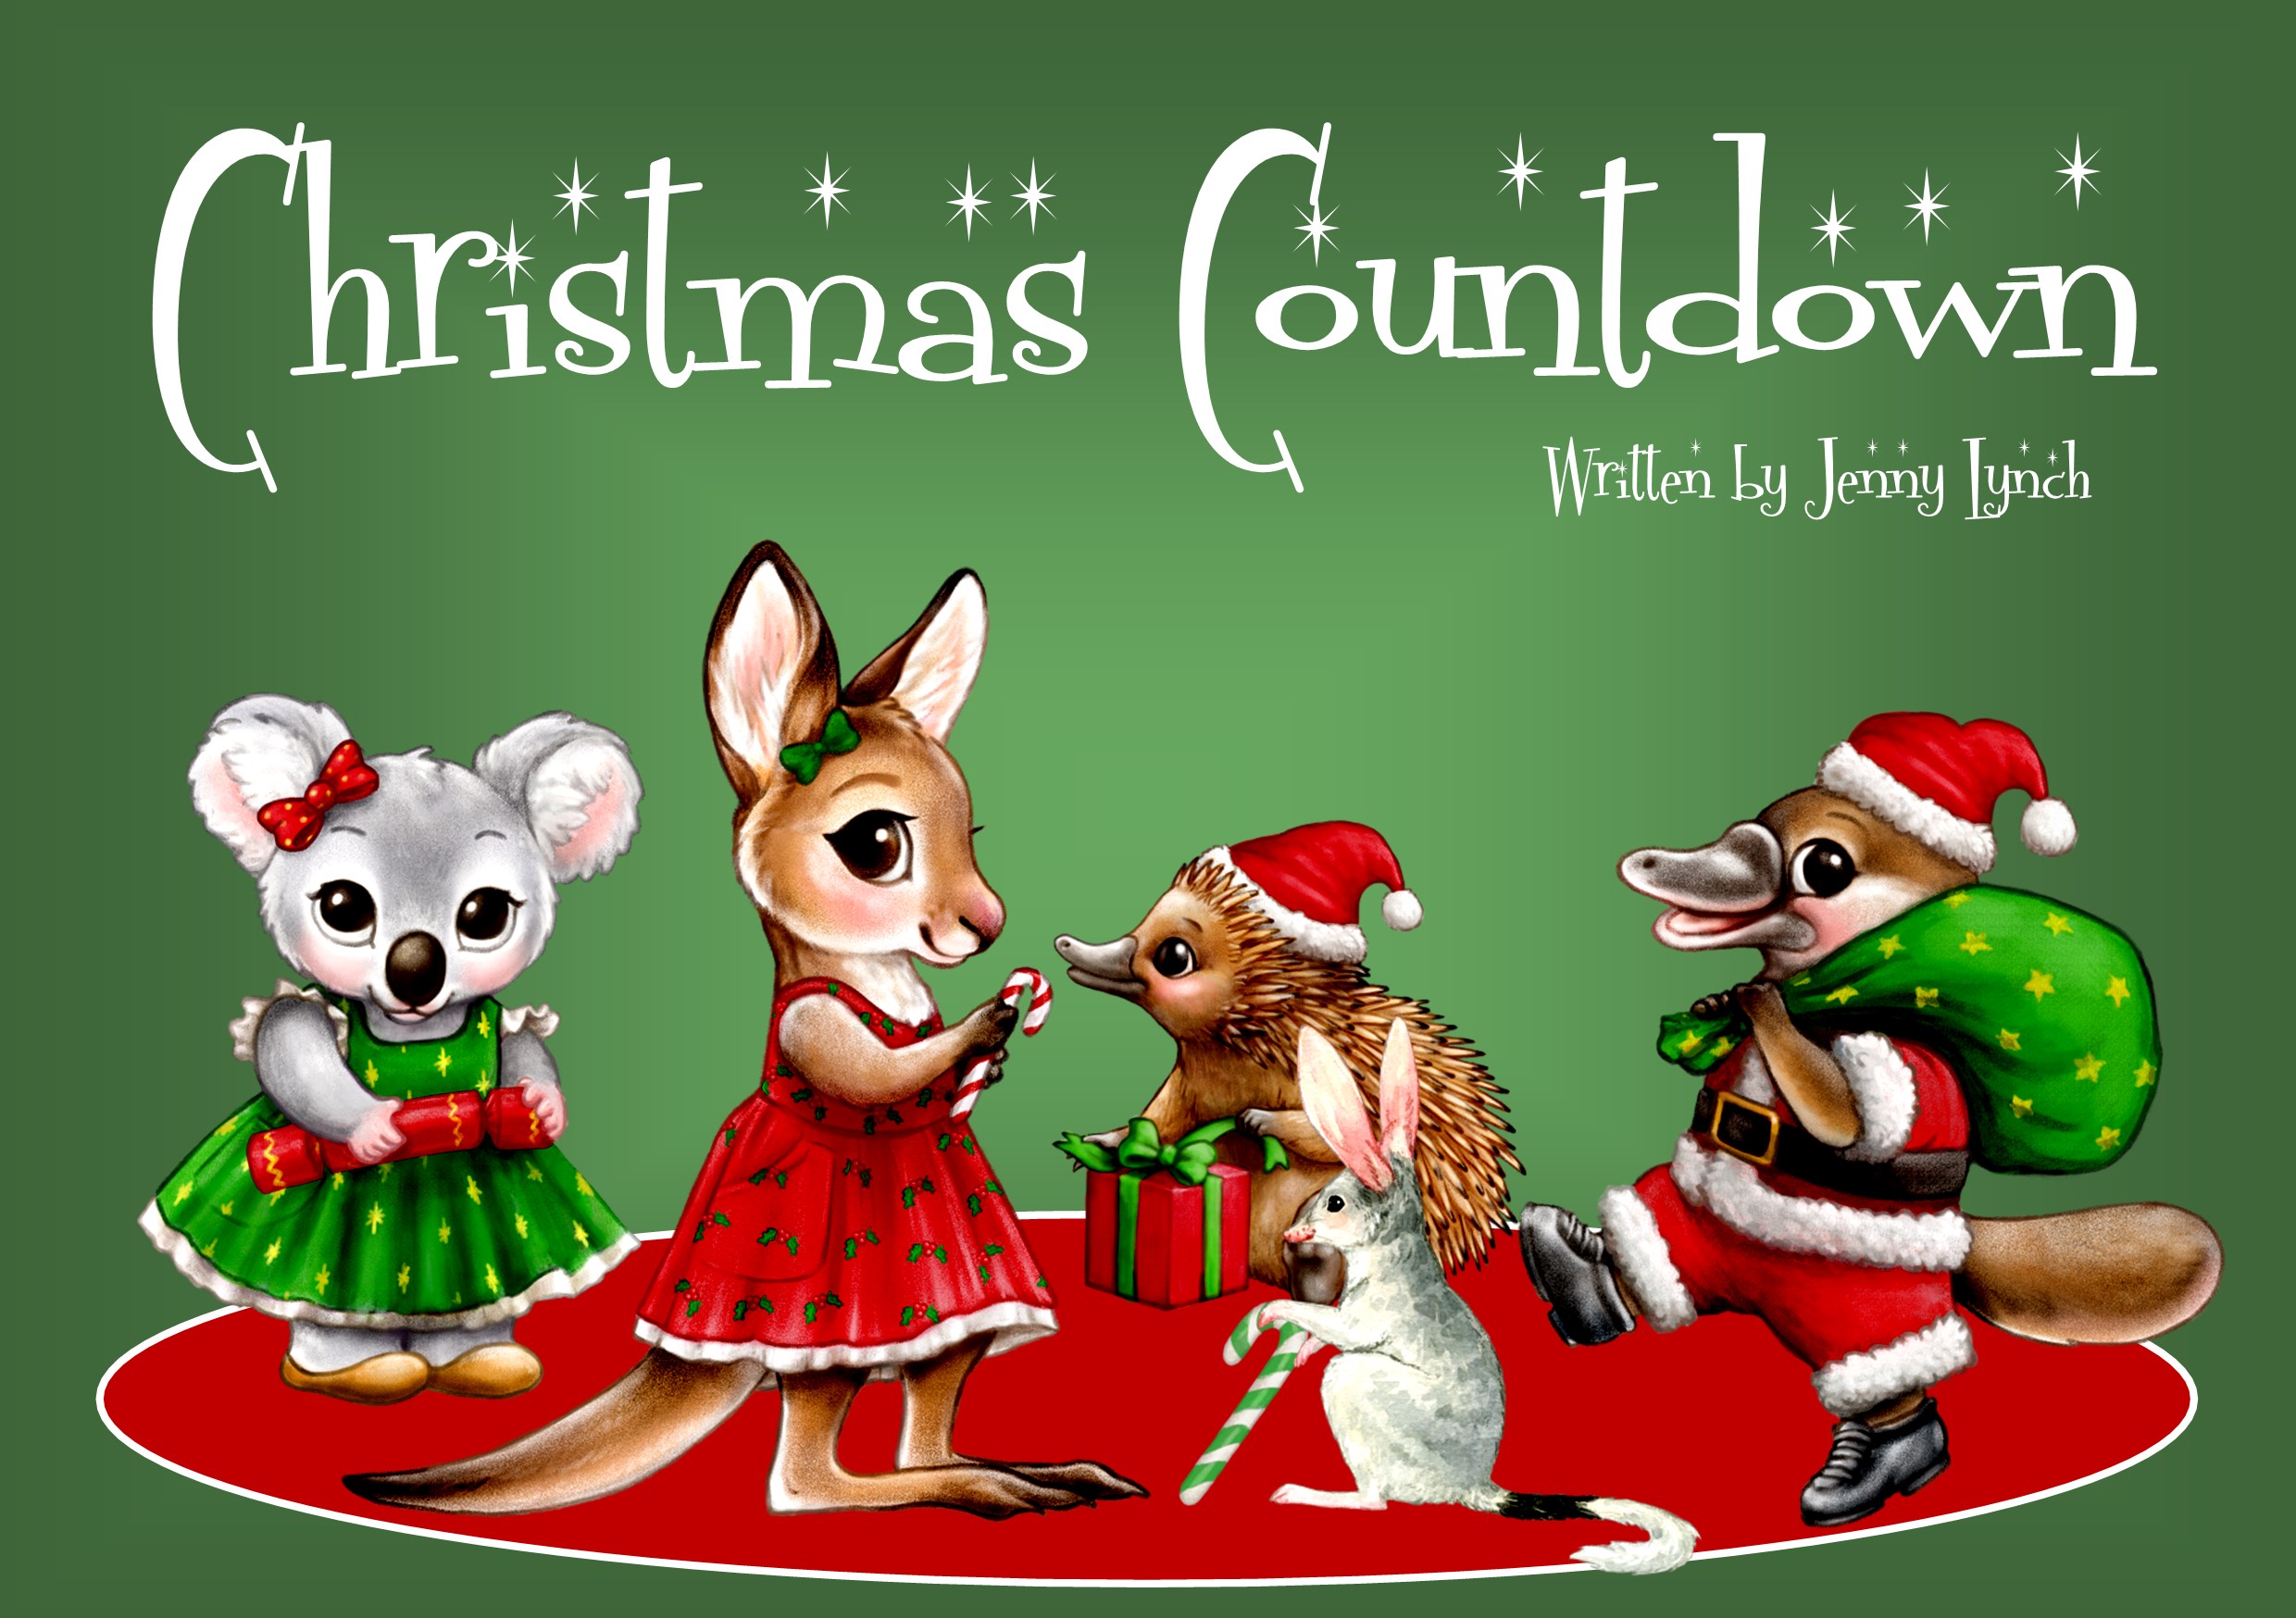 Christmas Countdown book cover